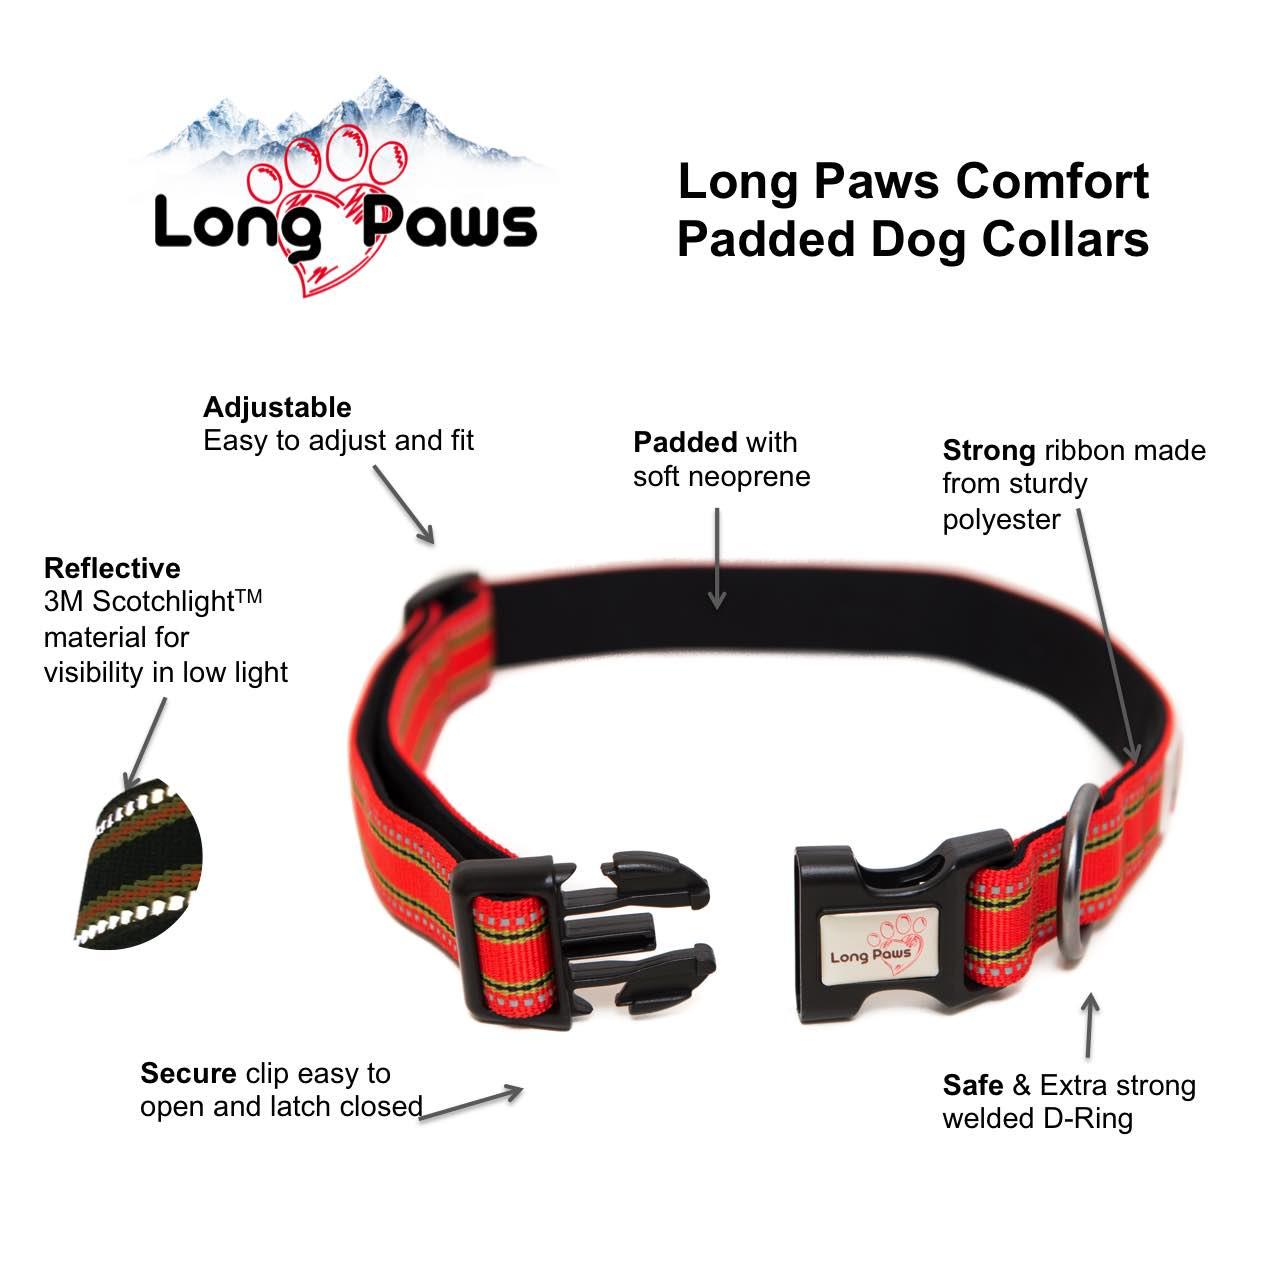 Long Paws Comfort Collar Features